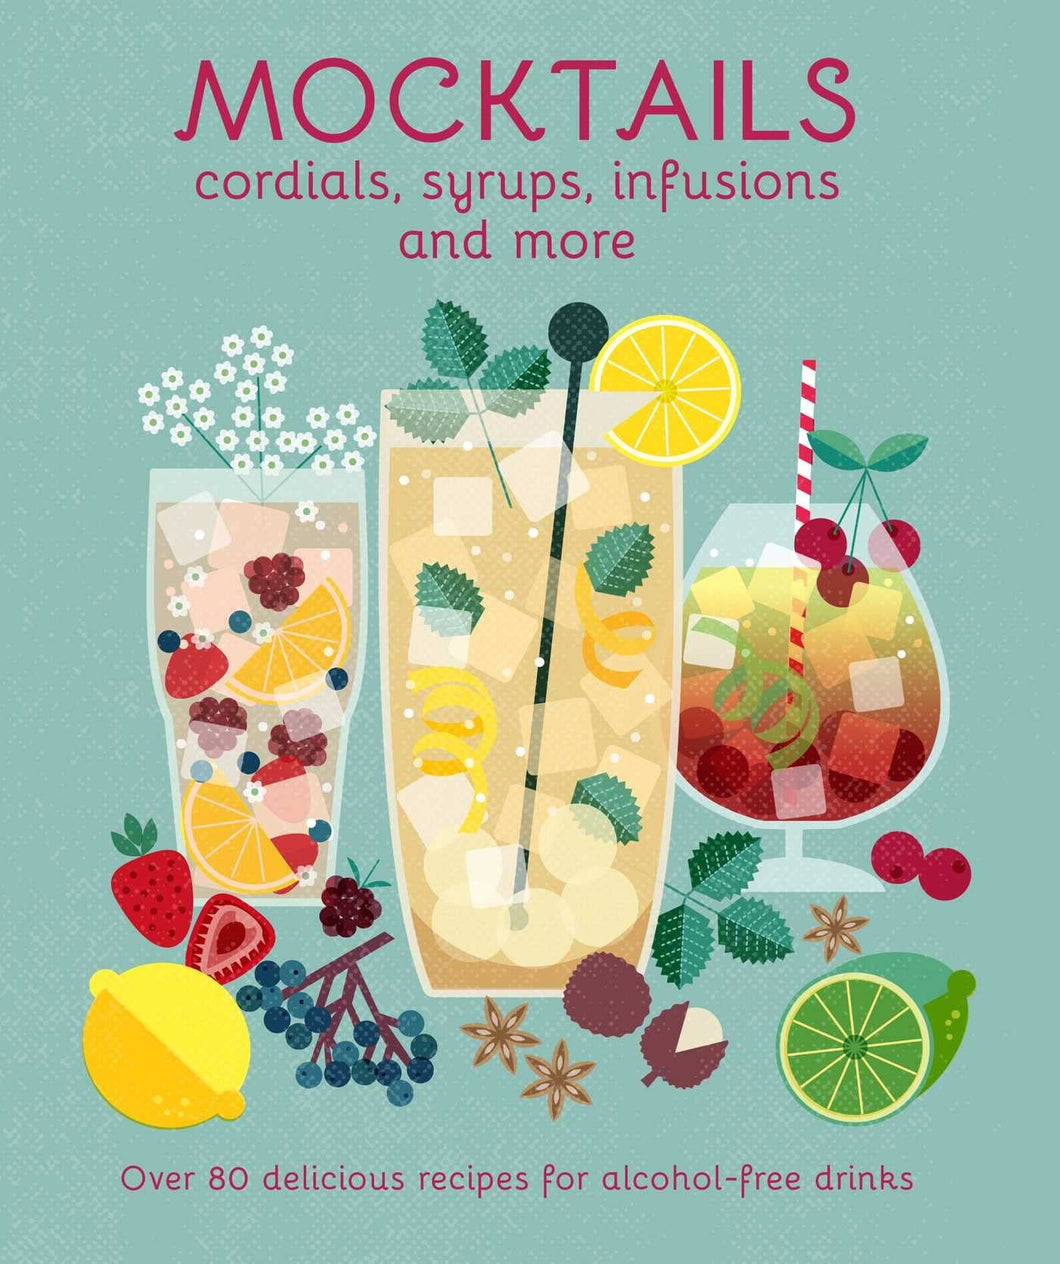 Mocktails: Cordials, Syrups, Infusions and More